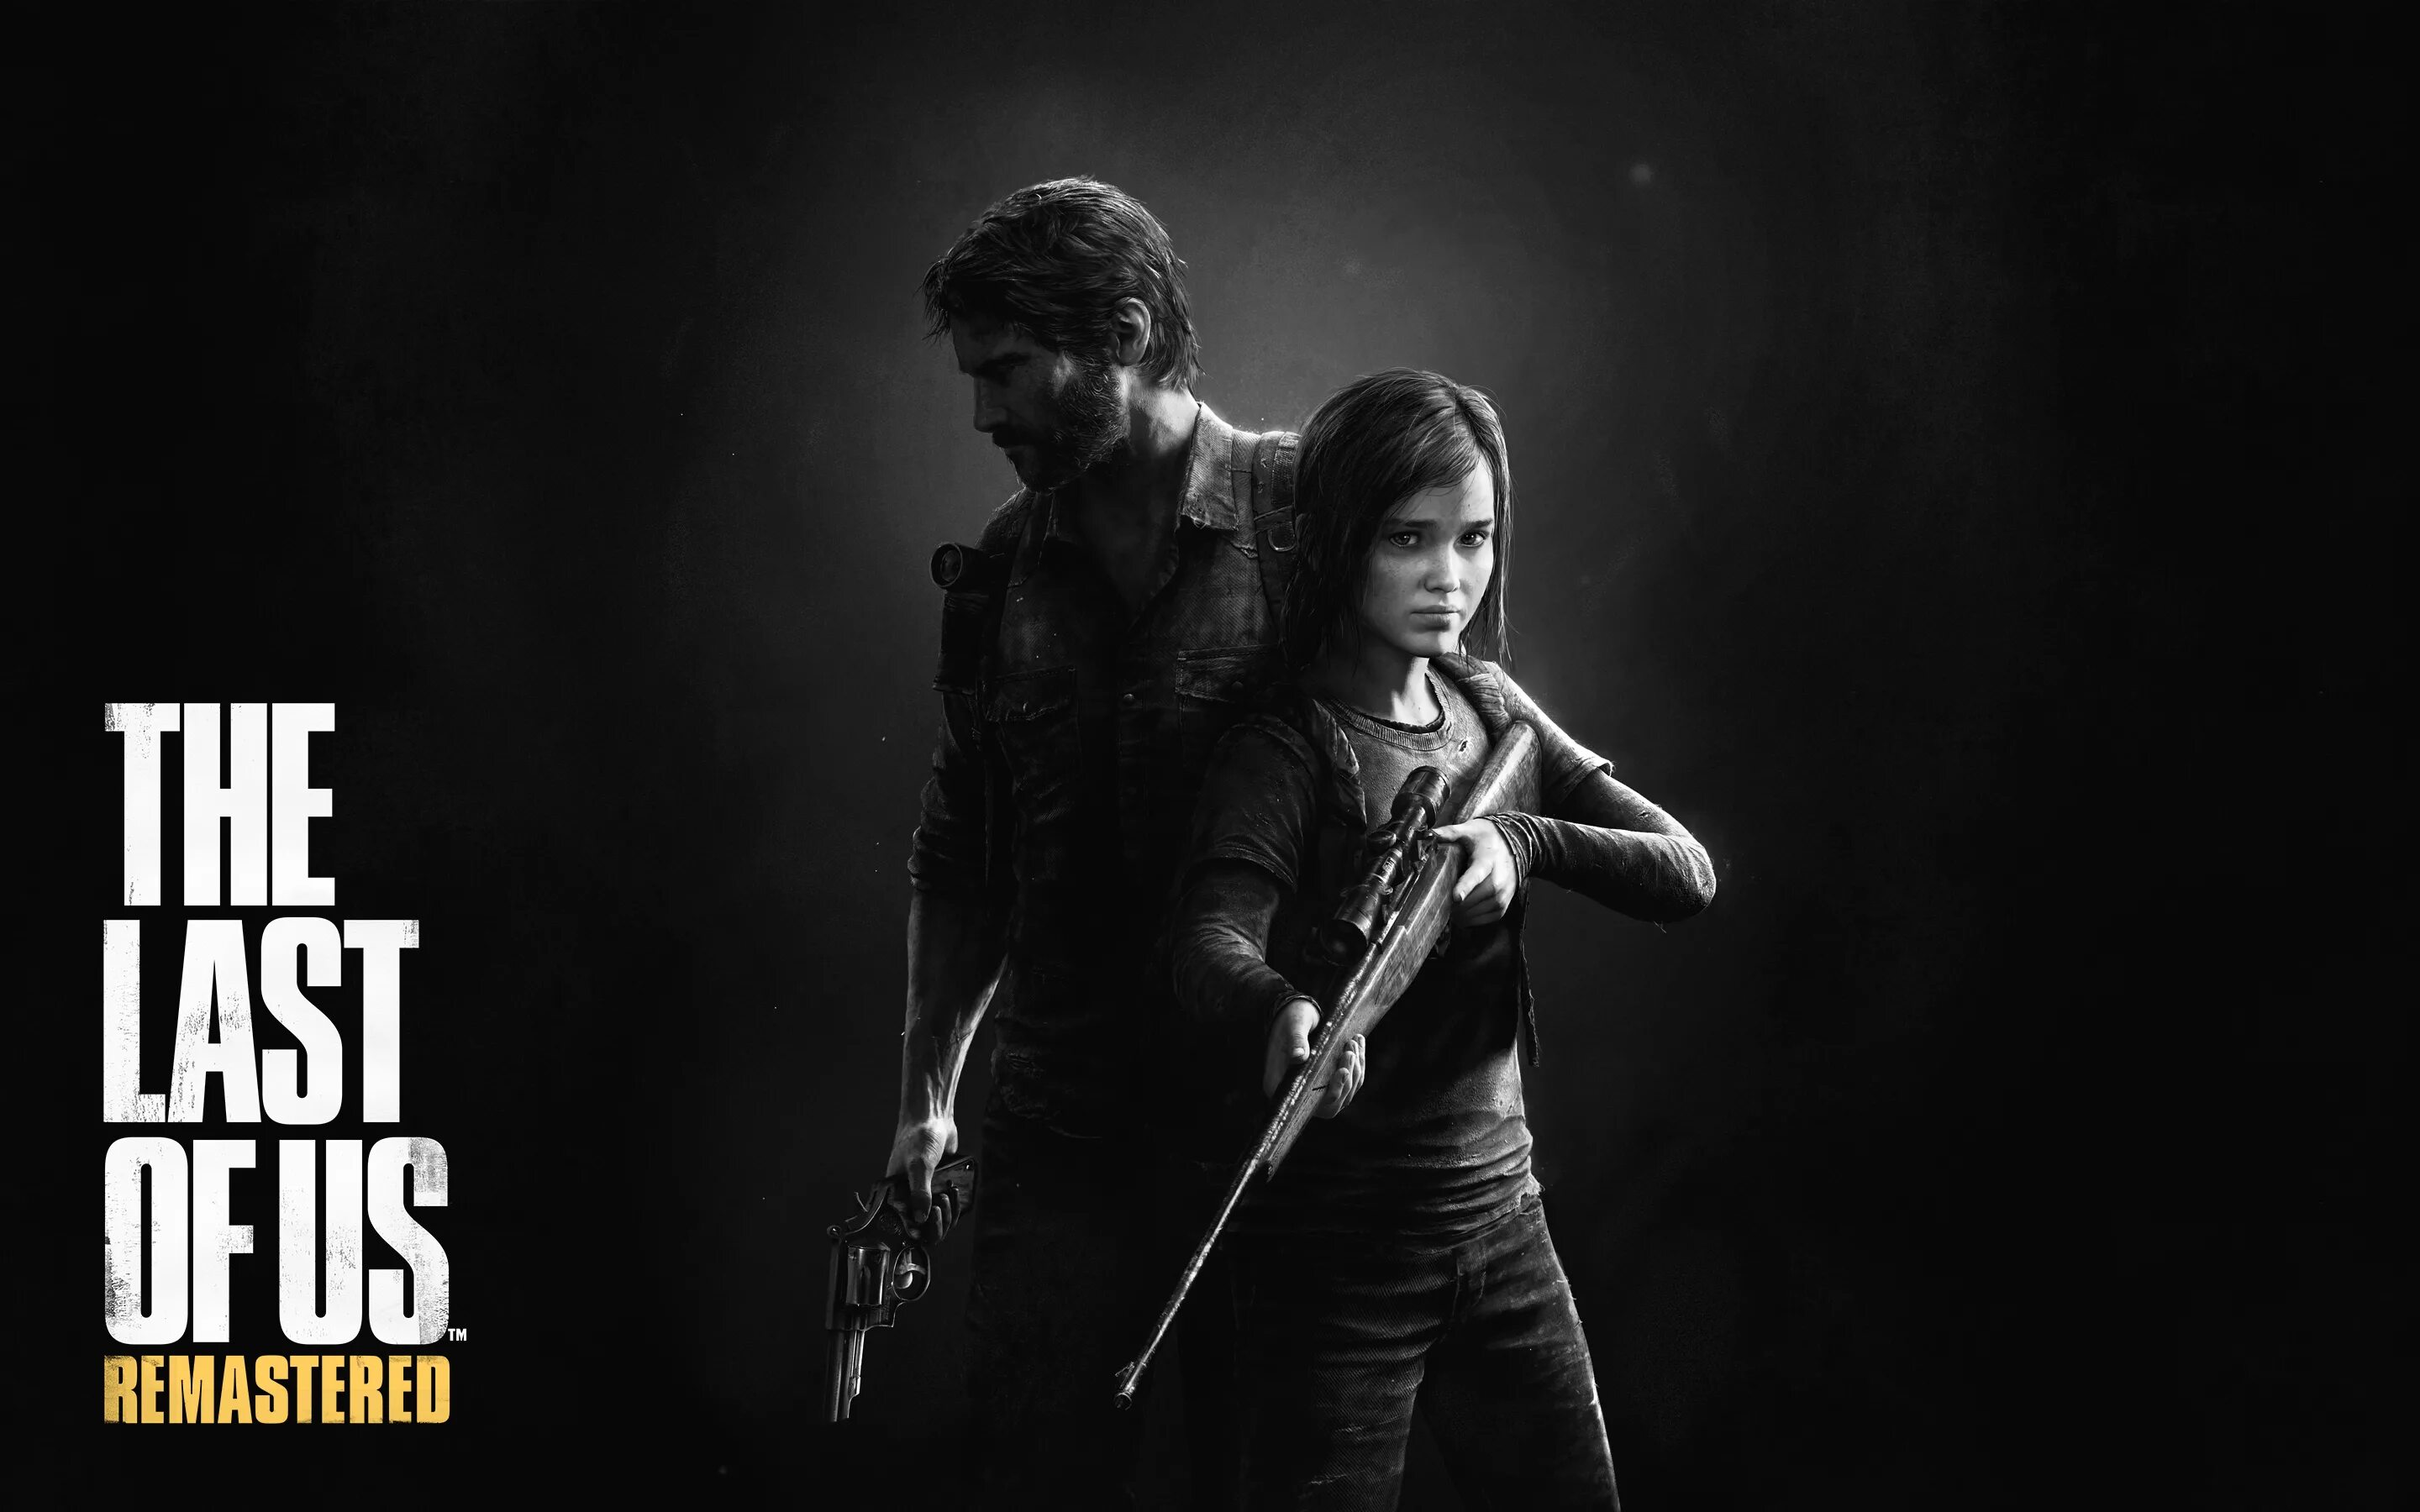 Ласт юс. The last of us. Джоэл the last of us. Джоэл the last of us 1.